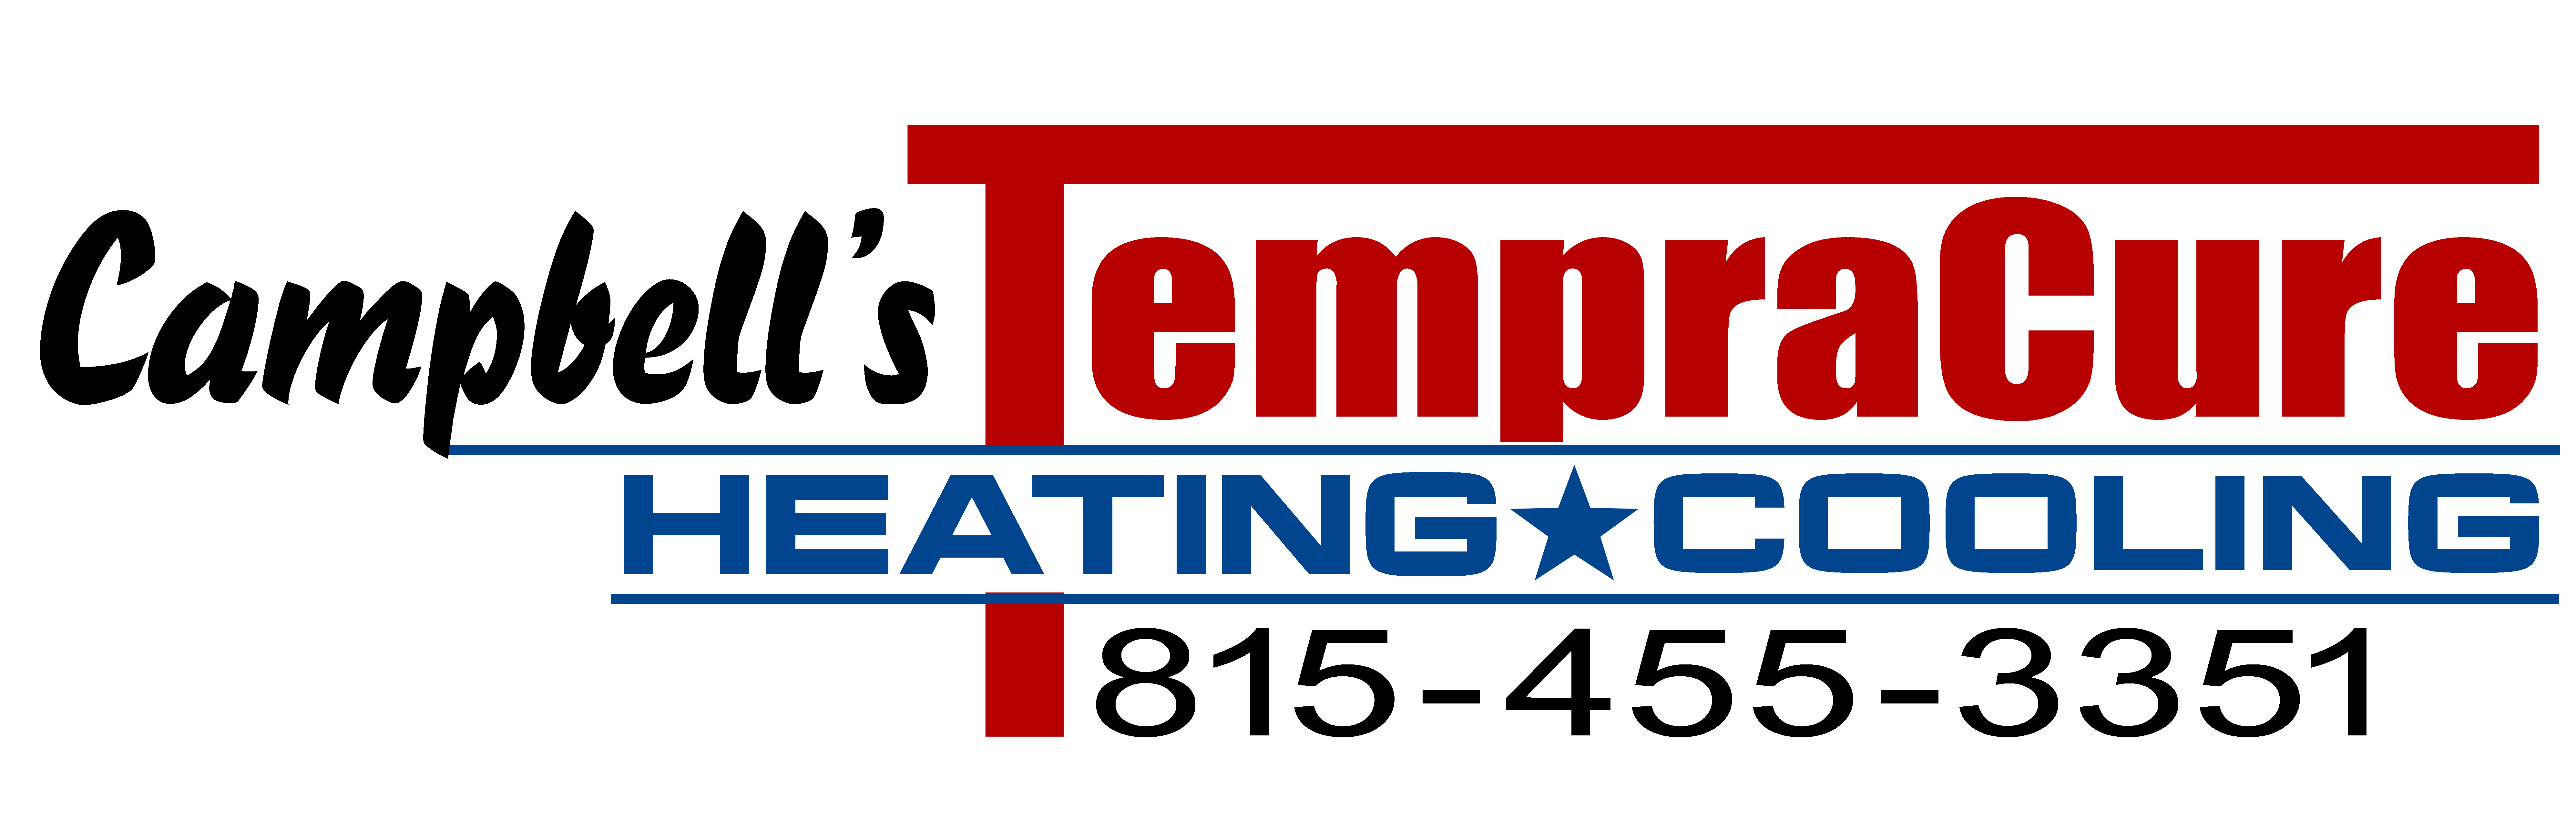 Campbell's Tempracure logo